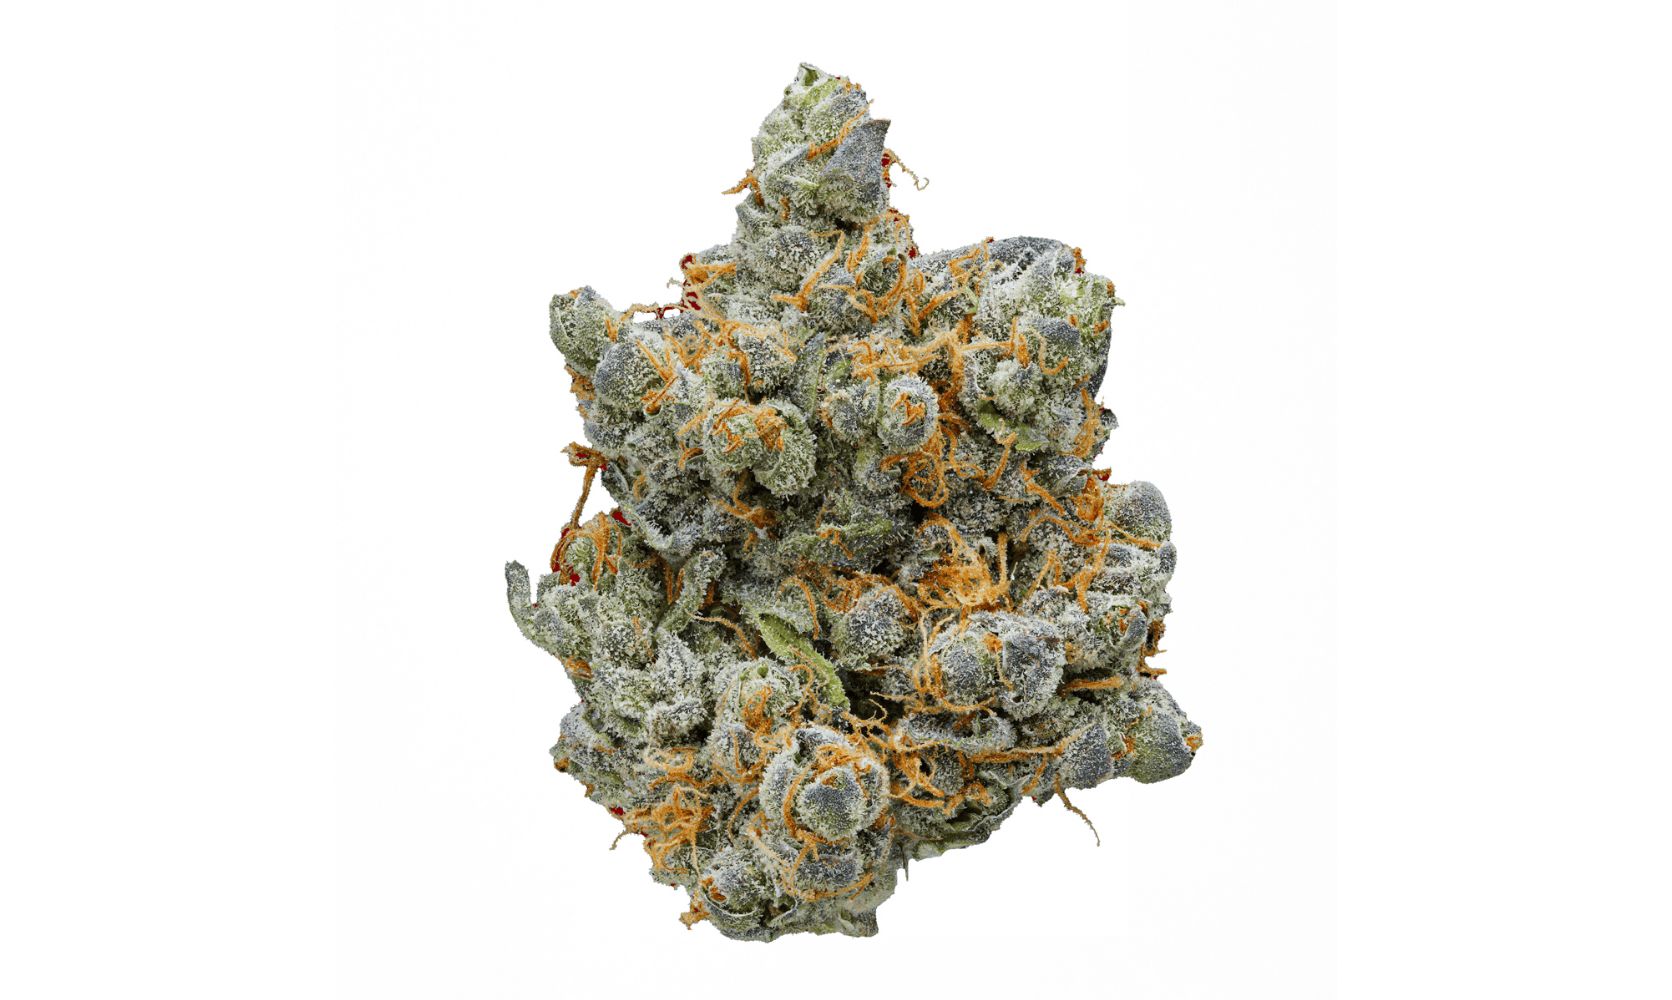 Discover everything about the iconic Blue Cheese strain in this in-depth review - flavours, effects, potency & whether this dank indica is worth trying.